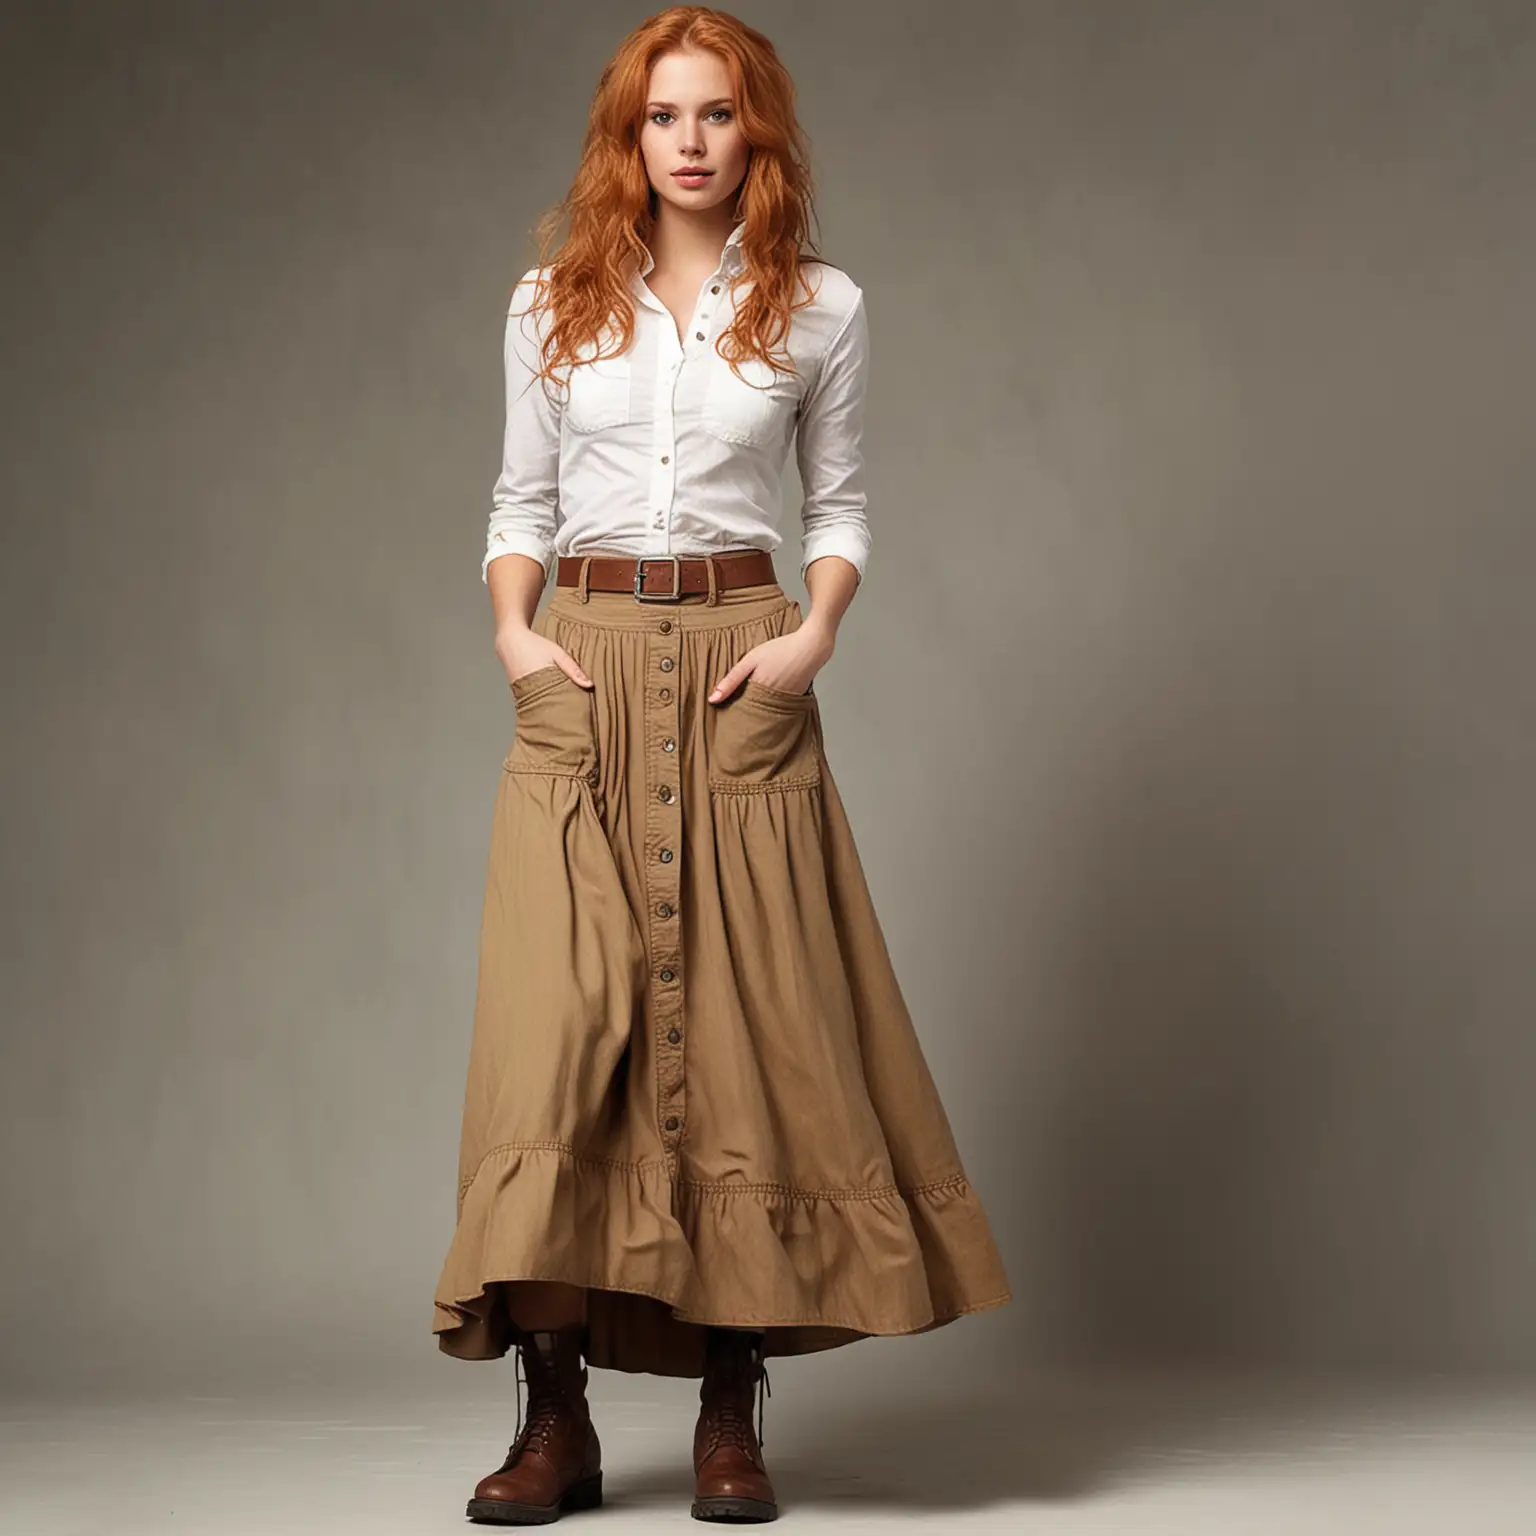 Young Woman with Strawberry Blonde Hair in Long Skirt and Boots